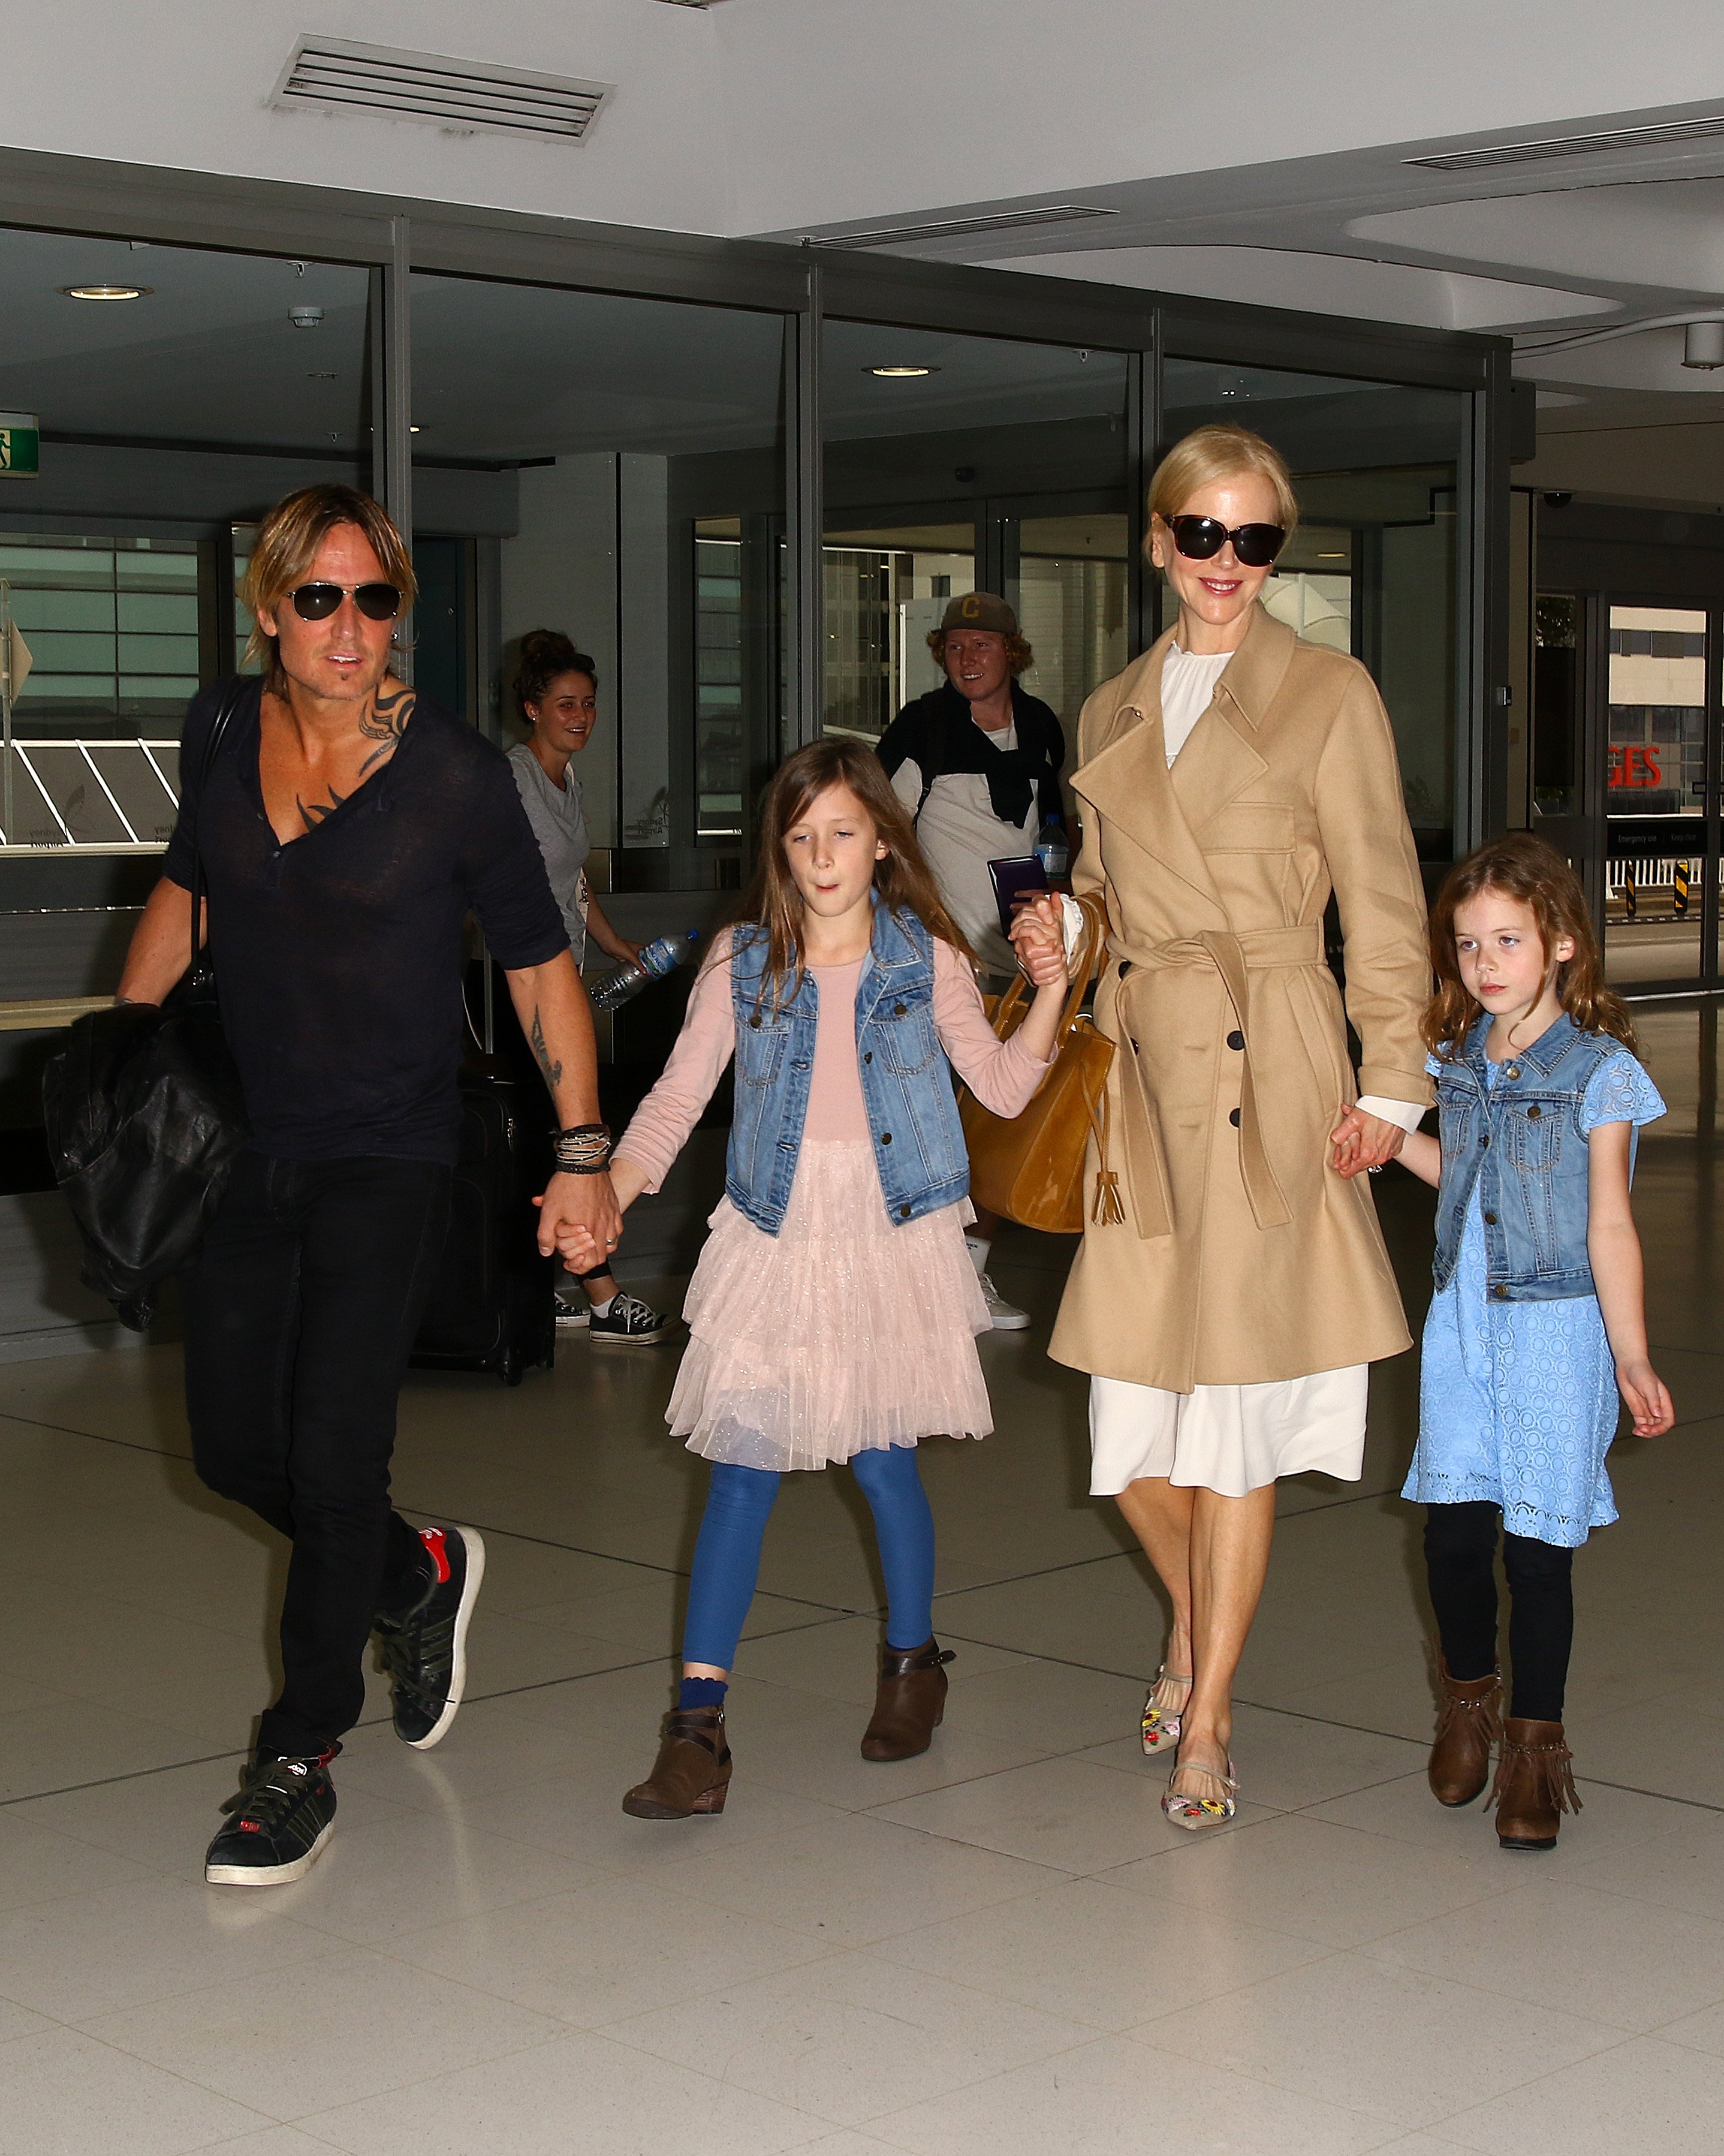 Keith Urban and Nicole Kidman at Sydney airport with their daughters Faith Margaret and Sunday Rose on March 28, 2017, in Sydney, Australia. | Source: Getty Images